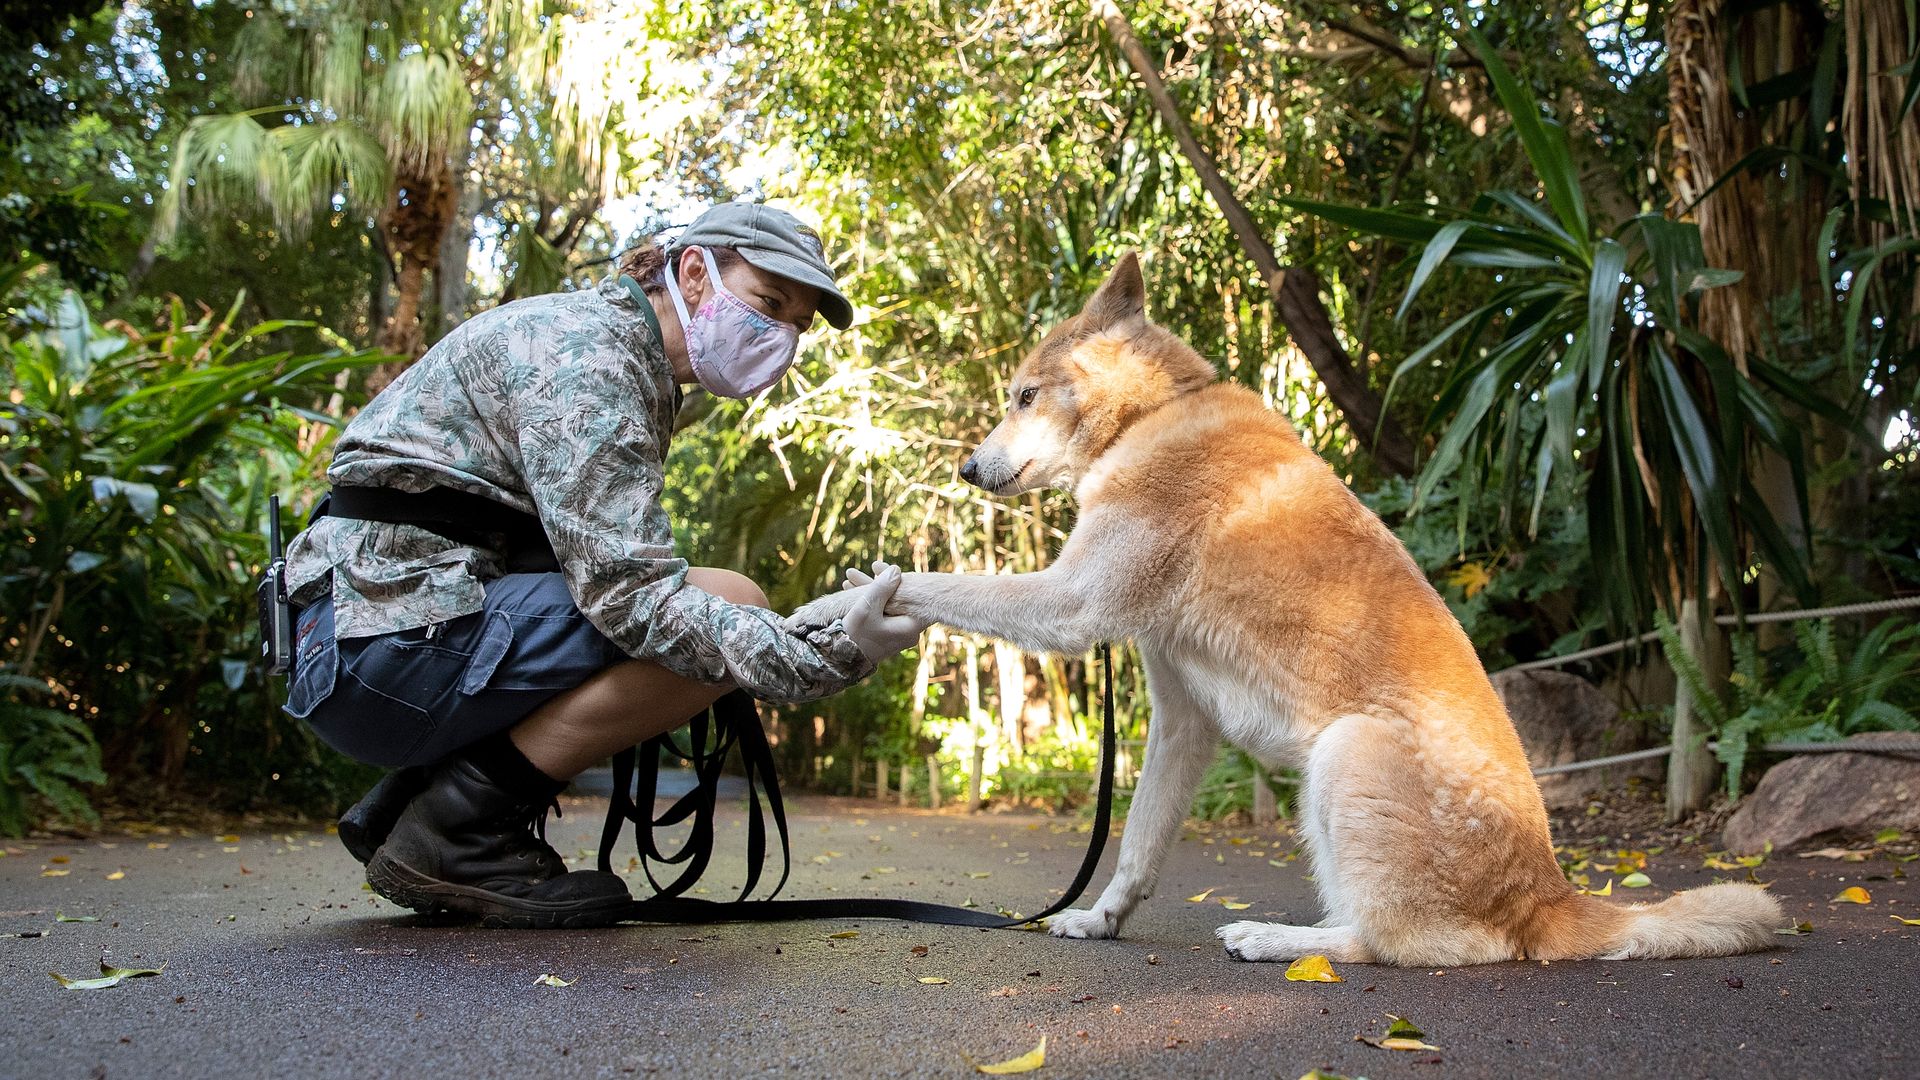 Zoo Keeper Lisa Fletcher interacts with Mirri the Dingo whilst on a walk at Perth Zoo on April 23, 2020